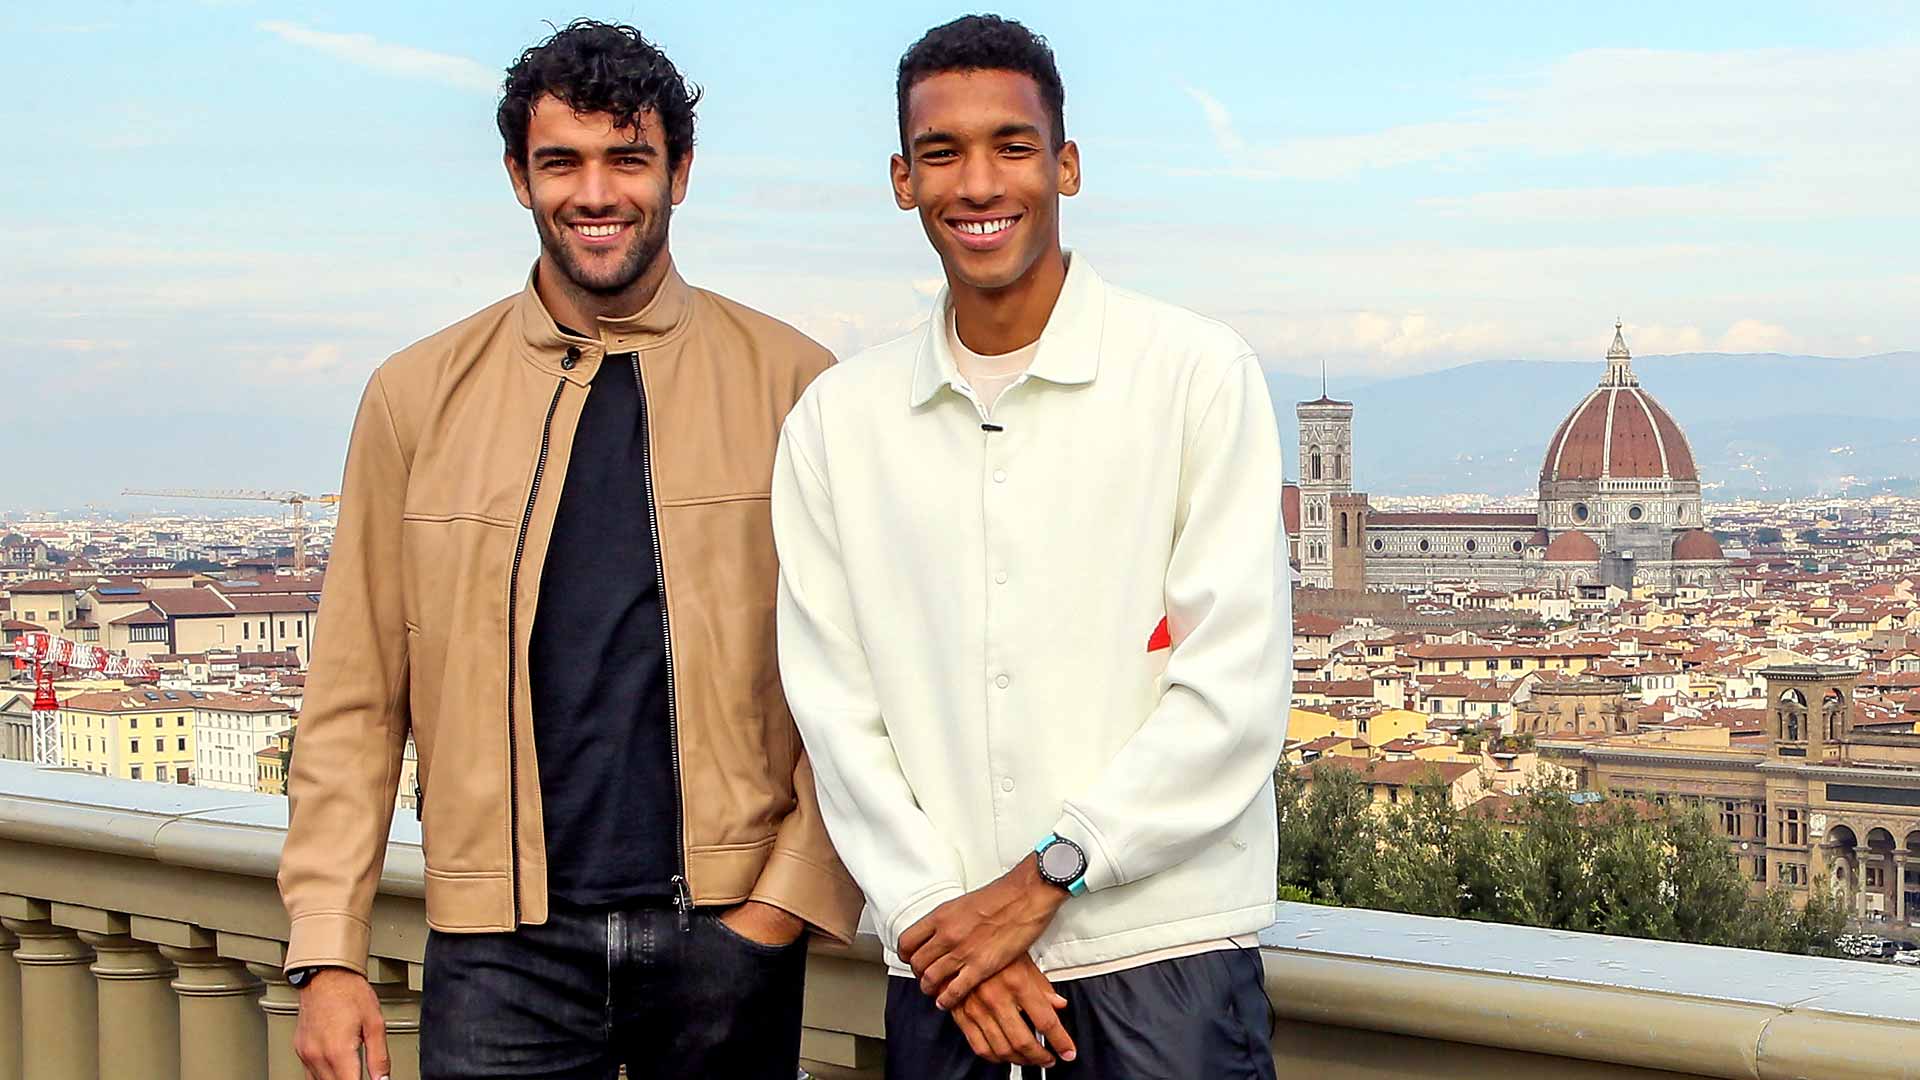 Matteo Berrettini and Felix Auger-Aliassime are the second and first seeds, respectively, this week in Florence.